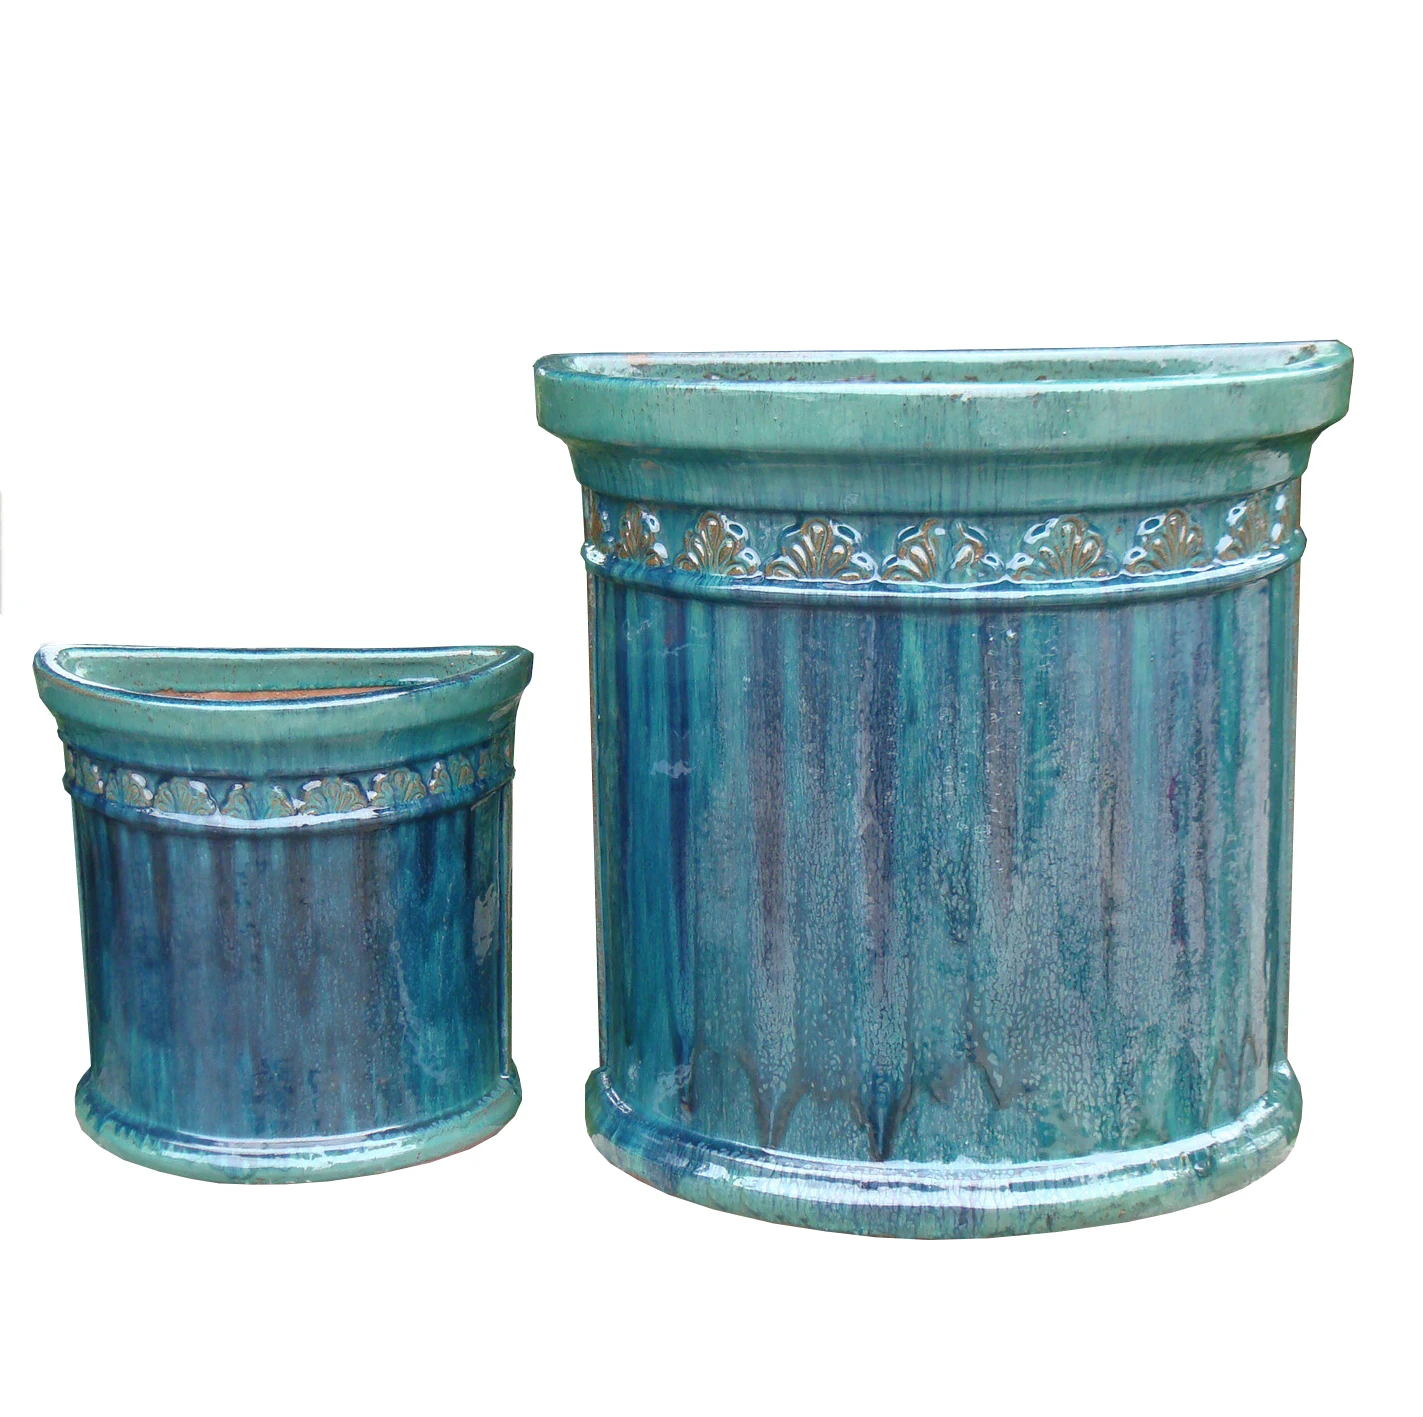 Wholesale Rustic Live Outdoor Glazed Ceramic Pottery Flower Pots and Garden Plant Planters for Home Bedroom or Nursery Use